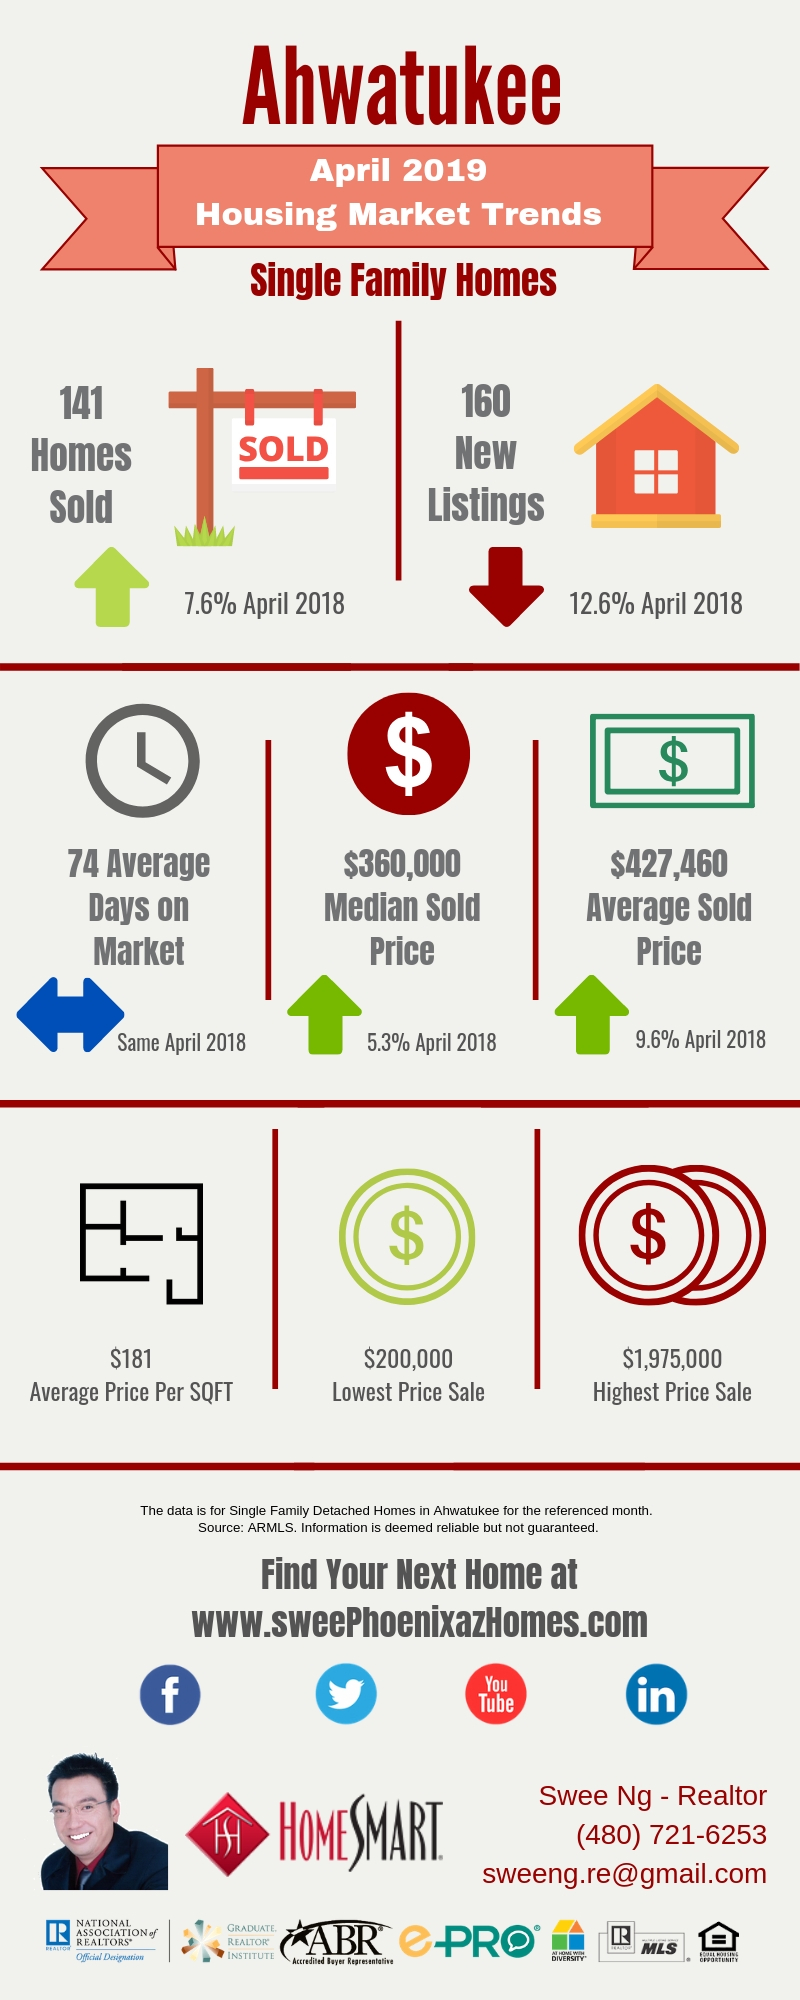 Ahwatukee Housing Market Trends Report April 2019, House Value, Real Estate and Statistic by Swee Ng